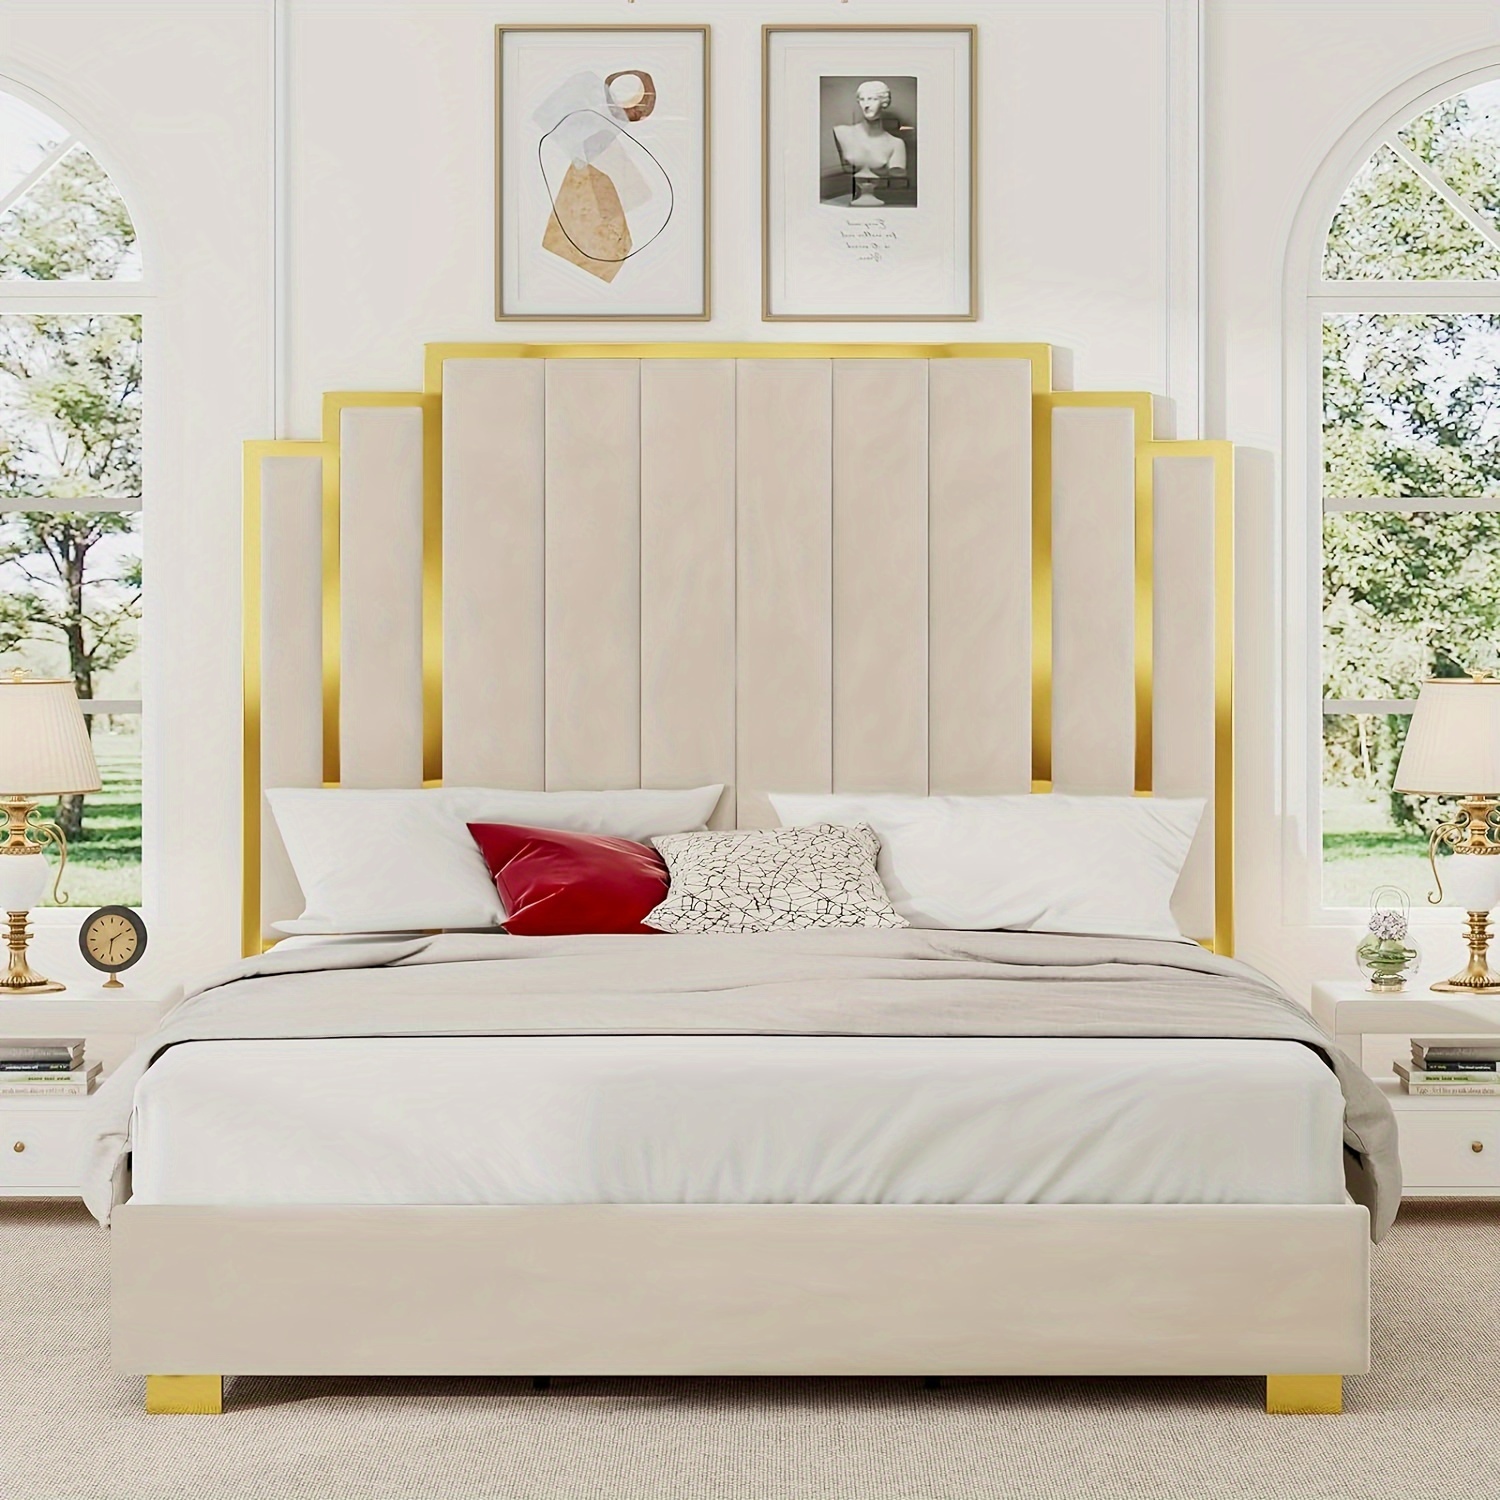 

King Modern Upholstered Bed Frame With 61-inch Headboard And Gold Plating Trim, No Box Spring Required Cream